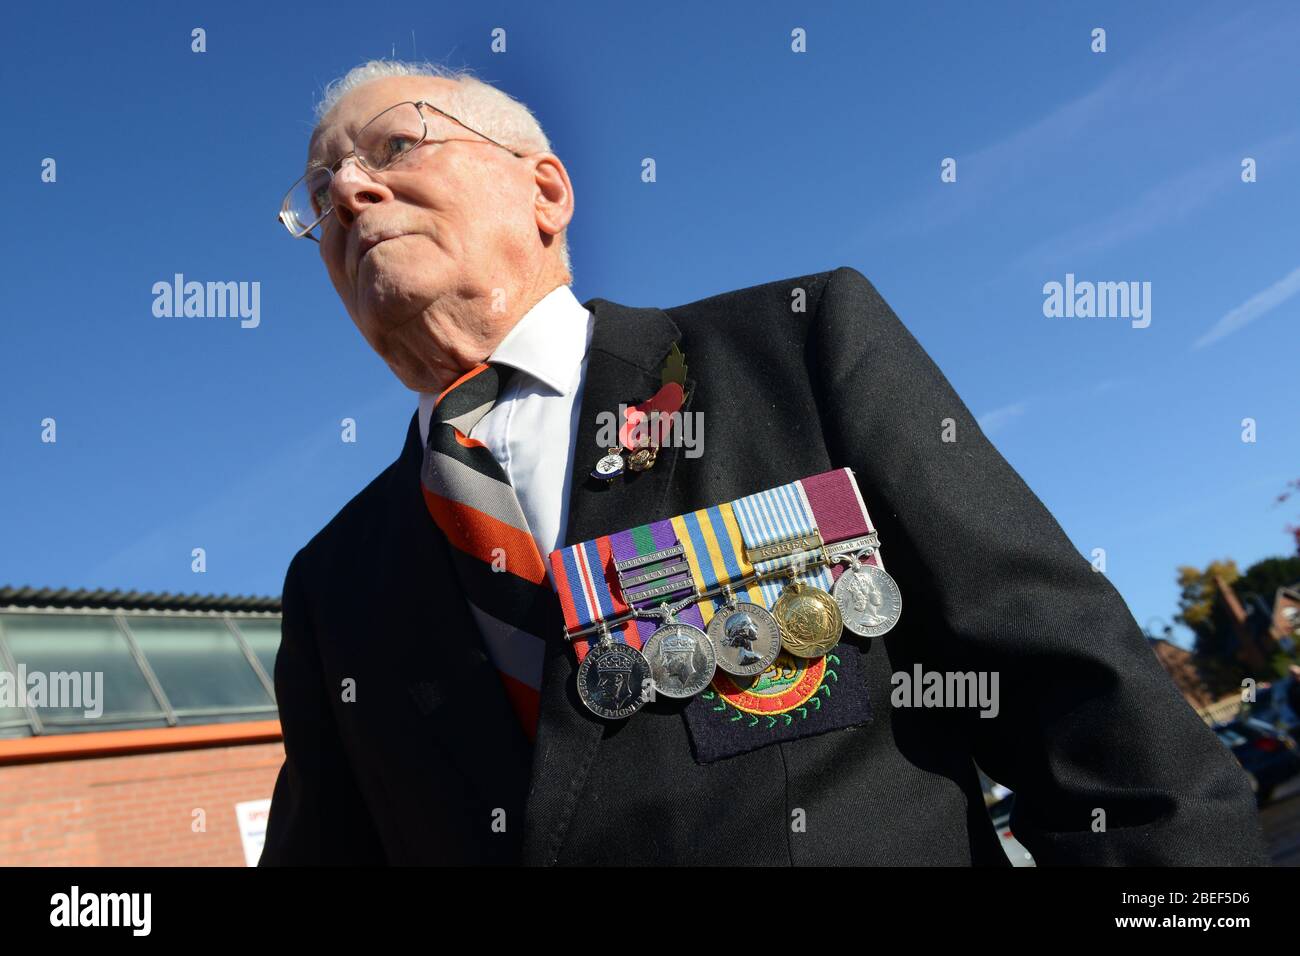 Ellesmere Remembrance Service. Wearing his medals with pride World War 2 veteran 86 year old Gordon Millhouse in November 2013 Stock Photo